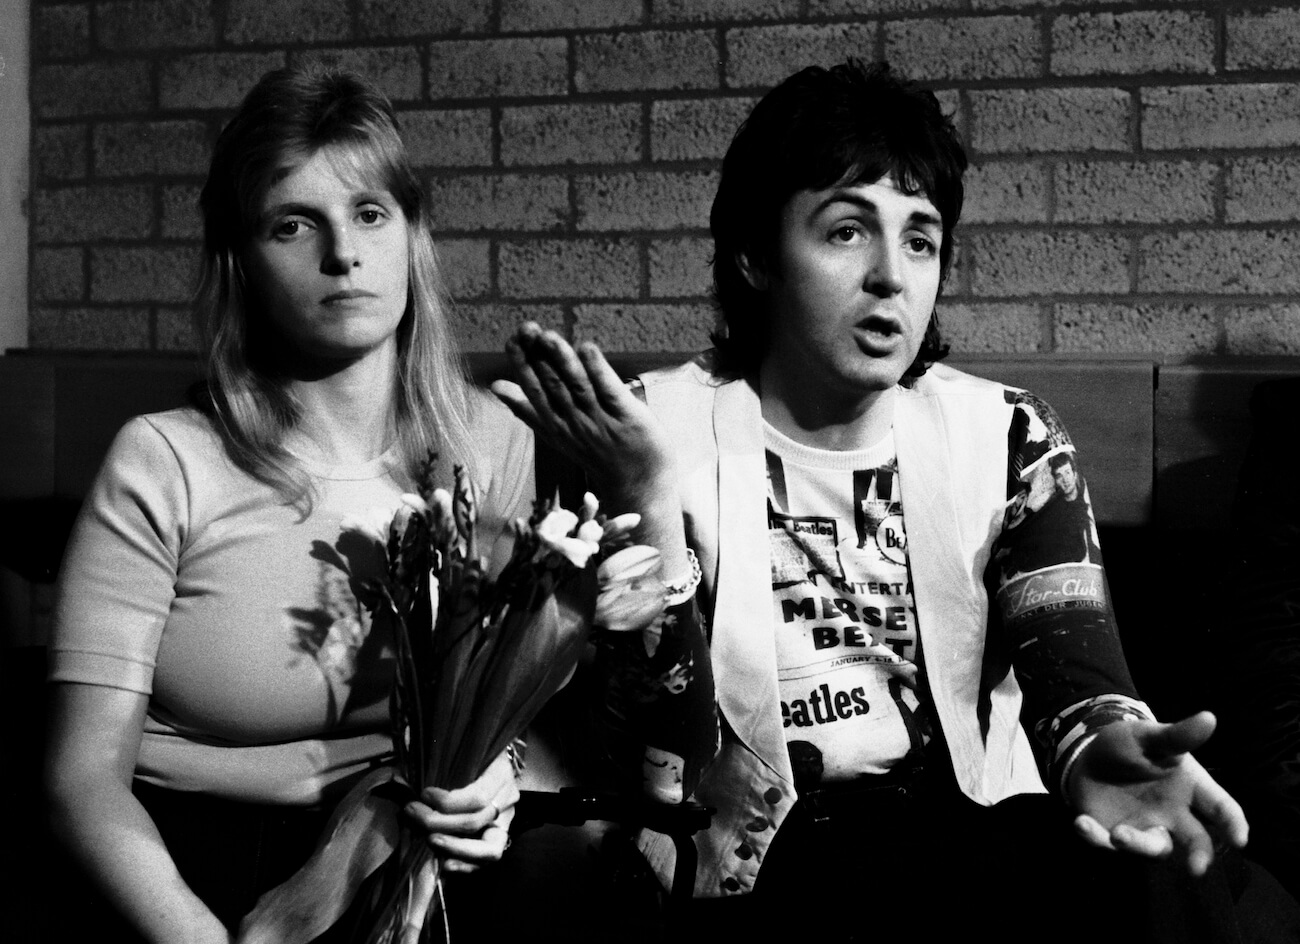 Paul McCartney and his wife Linda siting together in 1976.